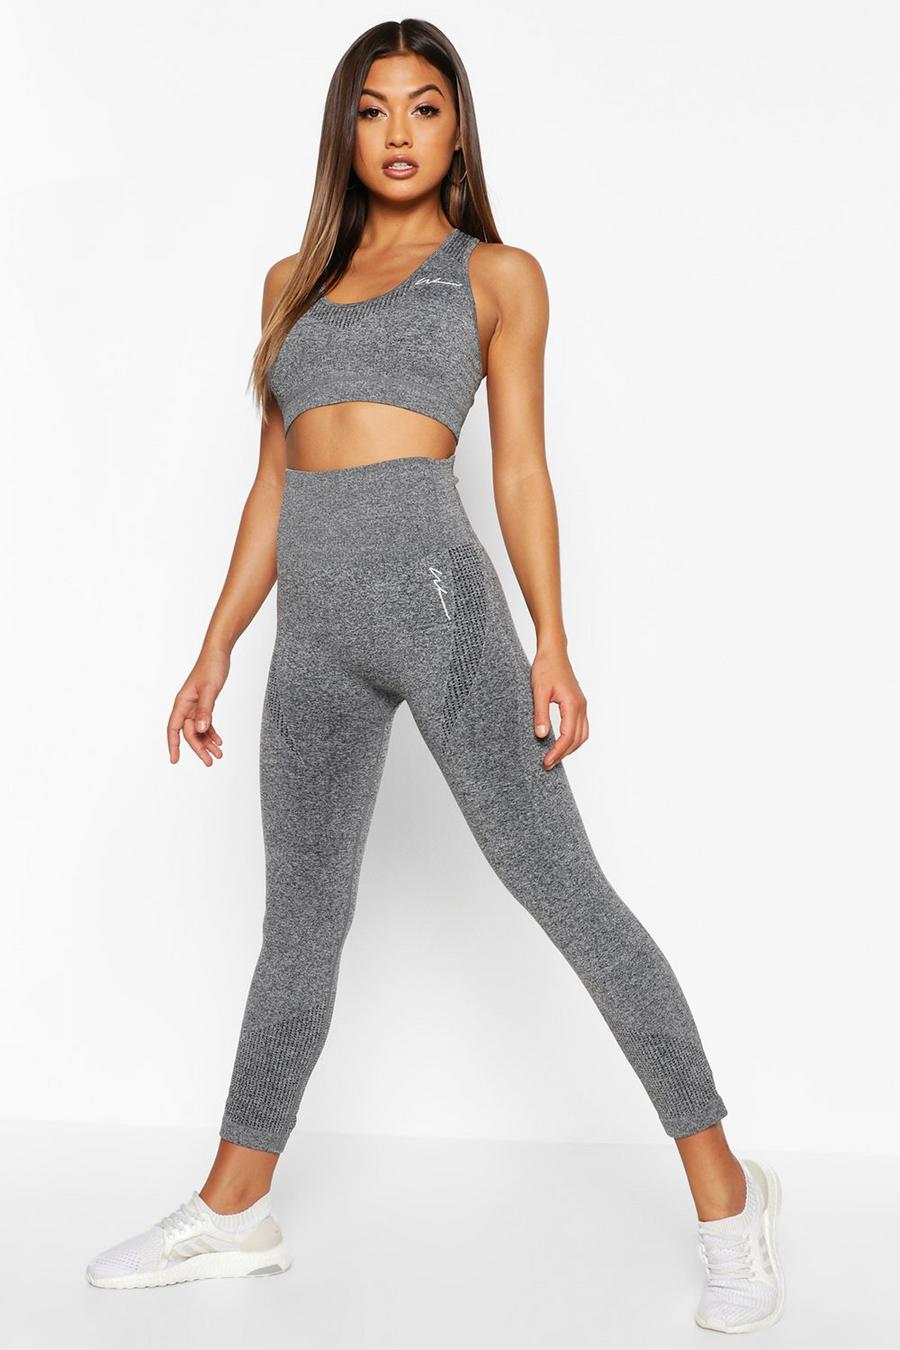 Dark grey Fit Supportive Waistband Seamless Workout Leggings